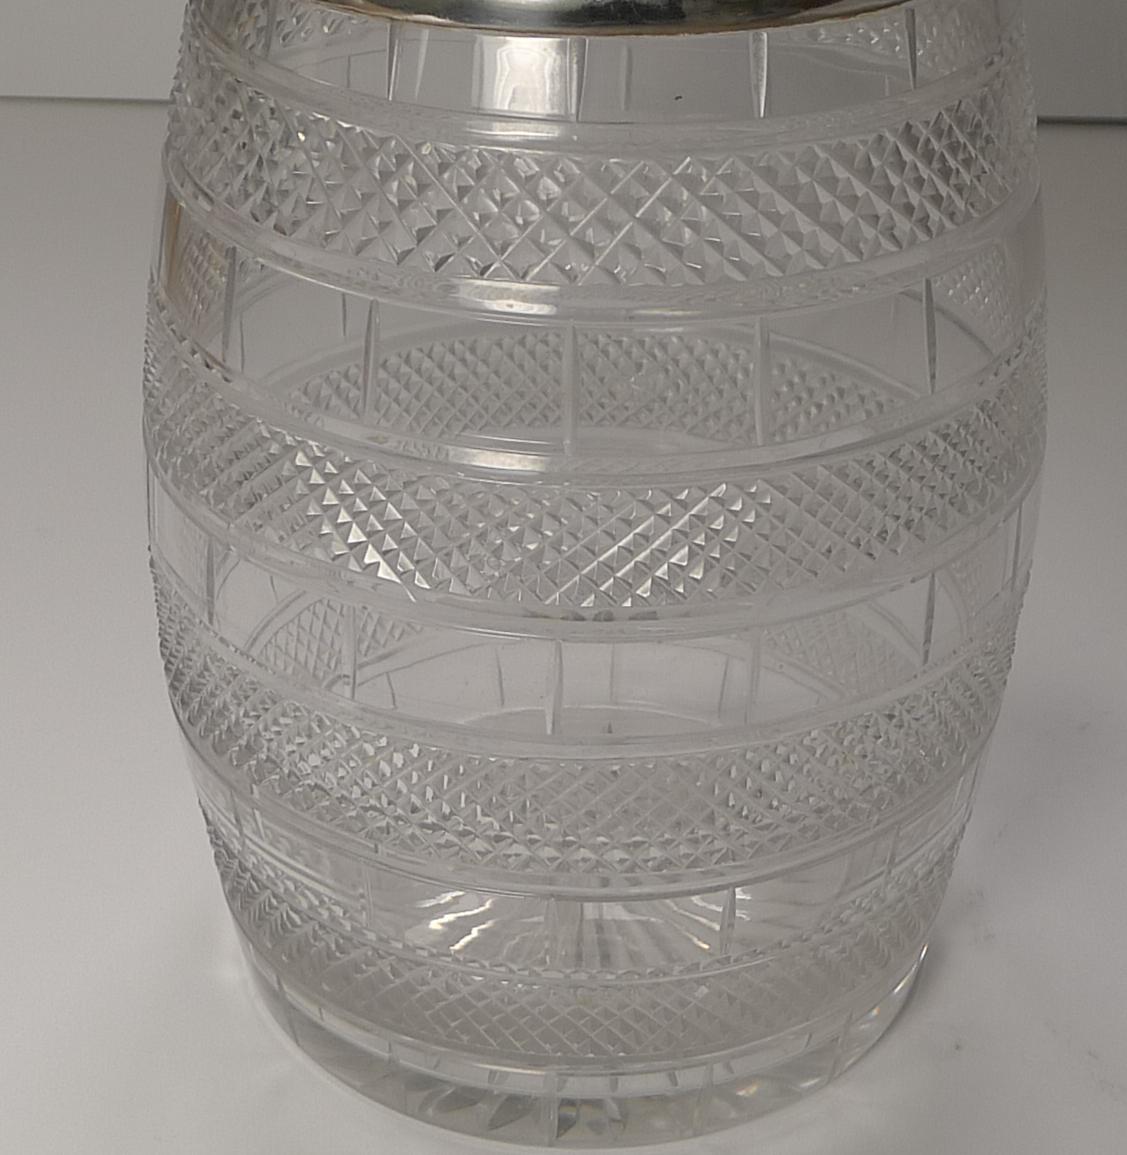 Quality Antique English Cut Glass & Silver Plate Biscuit Box / Barrel, c.1860 For Sale 2